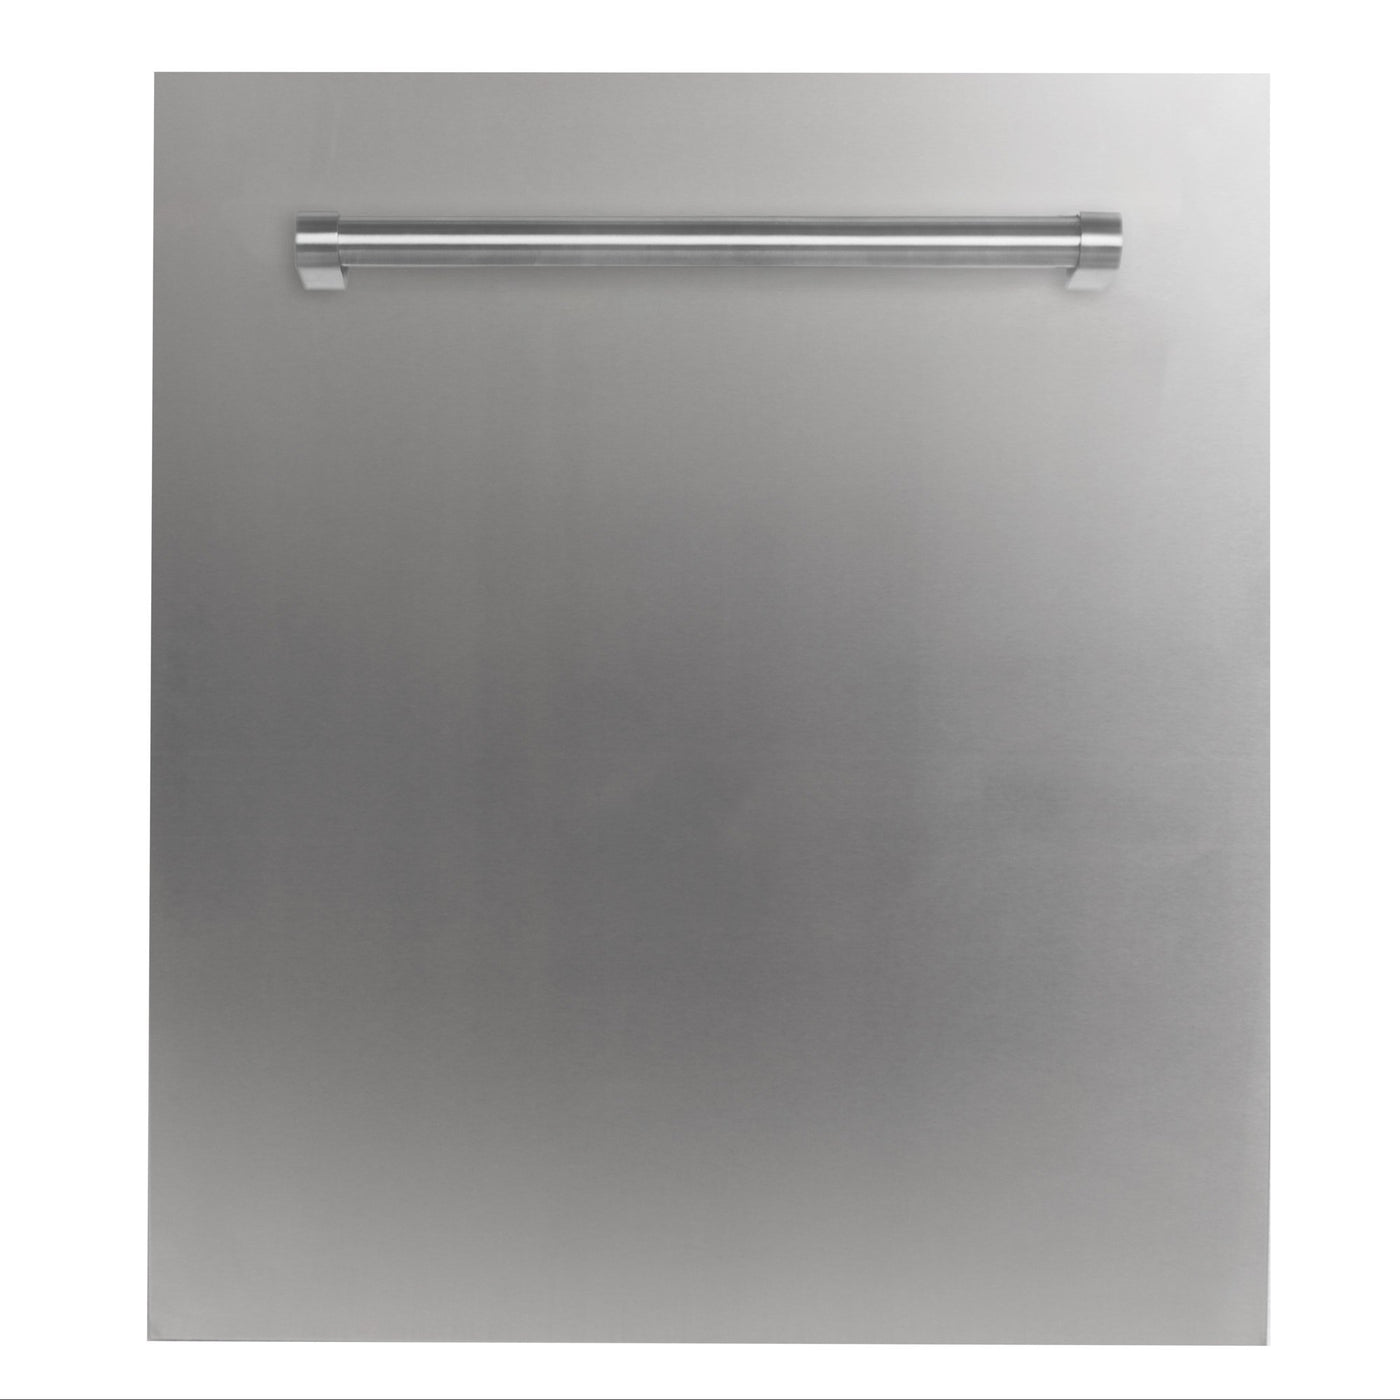 ZLINE Kitchen and Bath, ZLINE 24" Top Control Dishwasher with Stainless Steel Tub and Traditional Style Handle, DW-304-H-24,